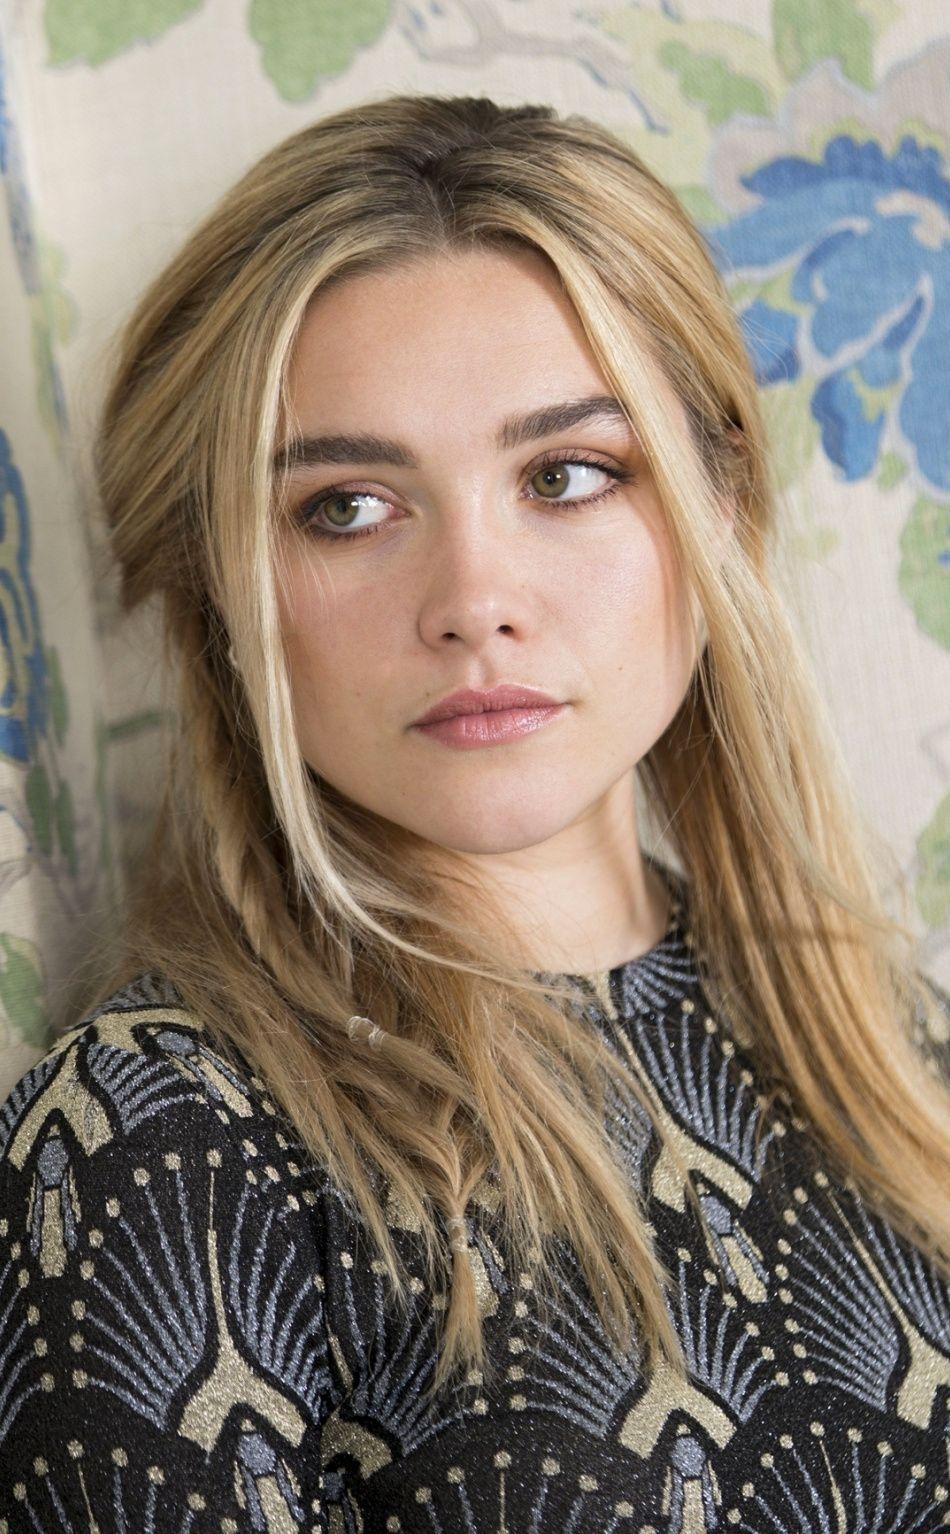 Blonde, famous celebrity, Florence Pugh wallpaper in 2020